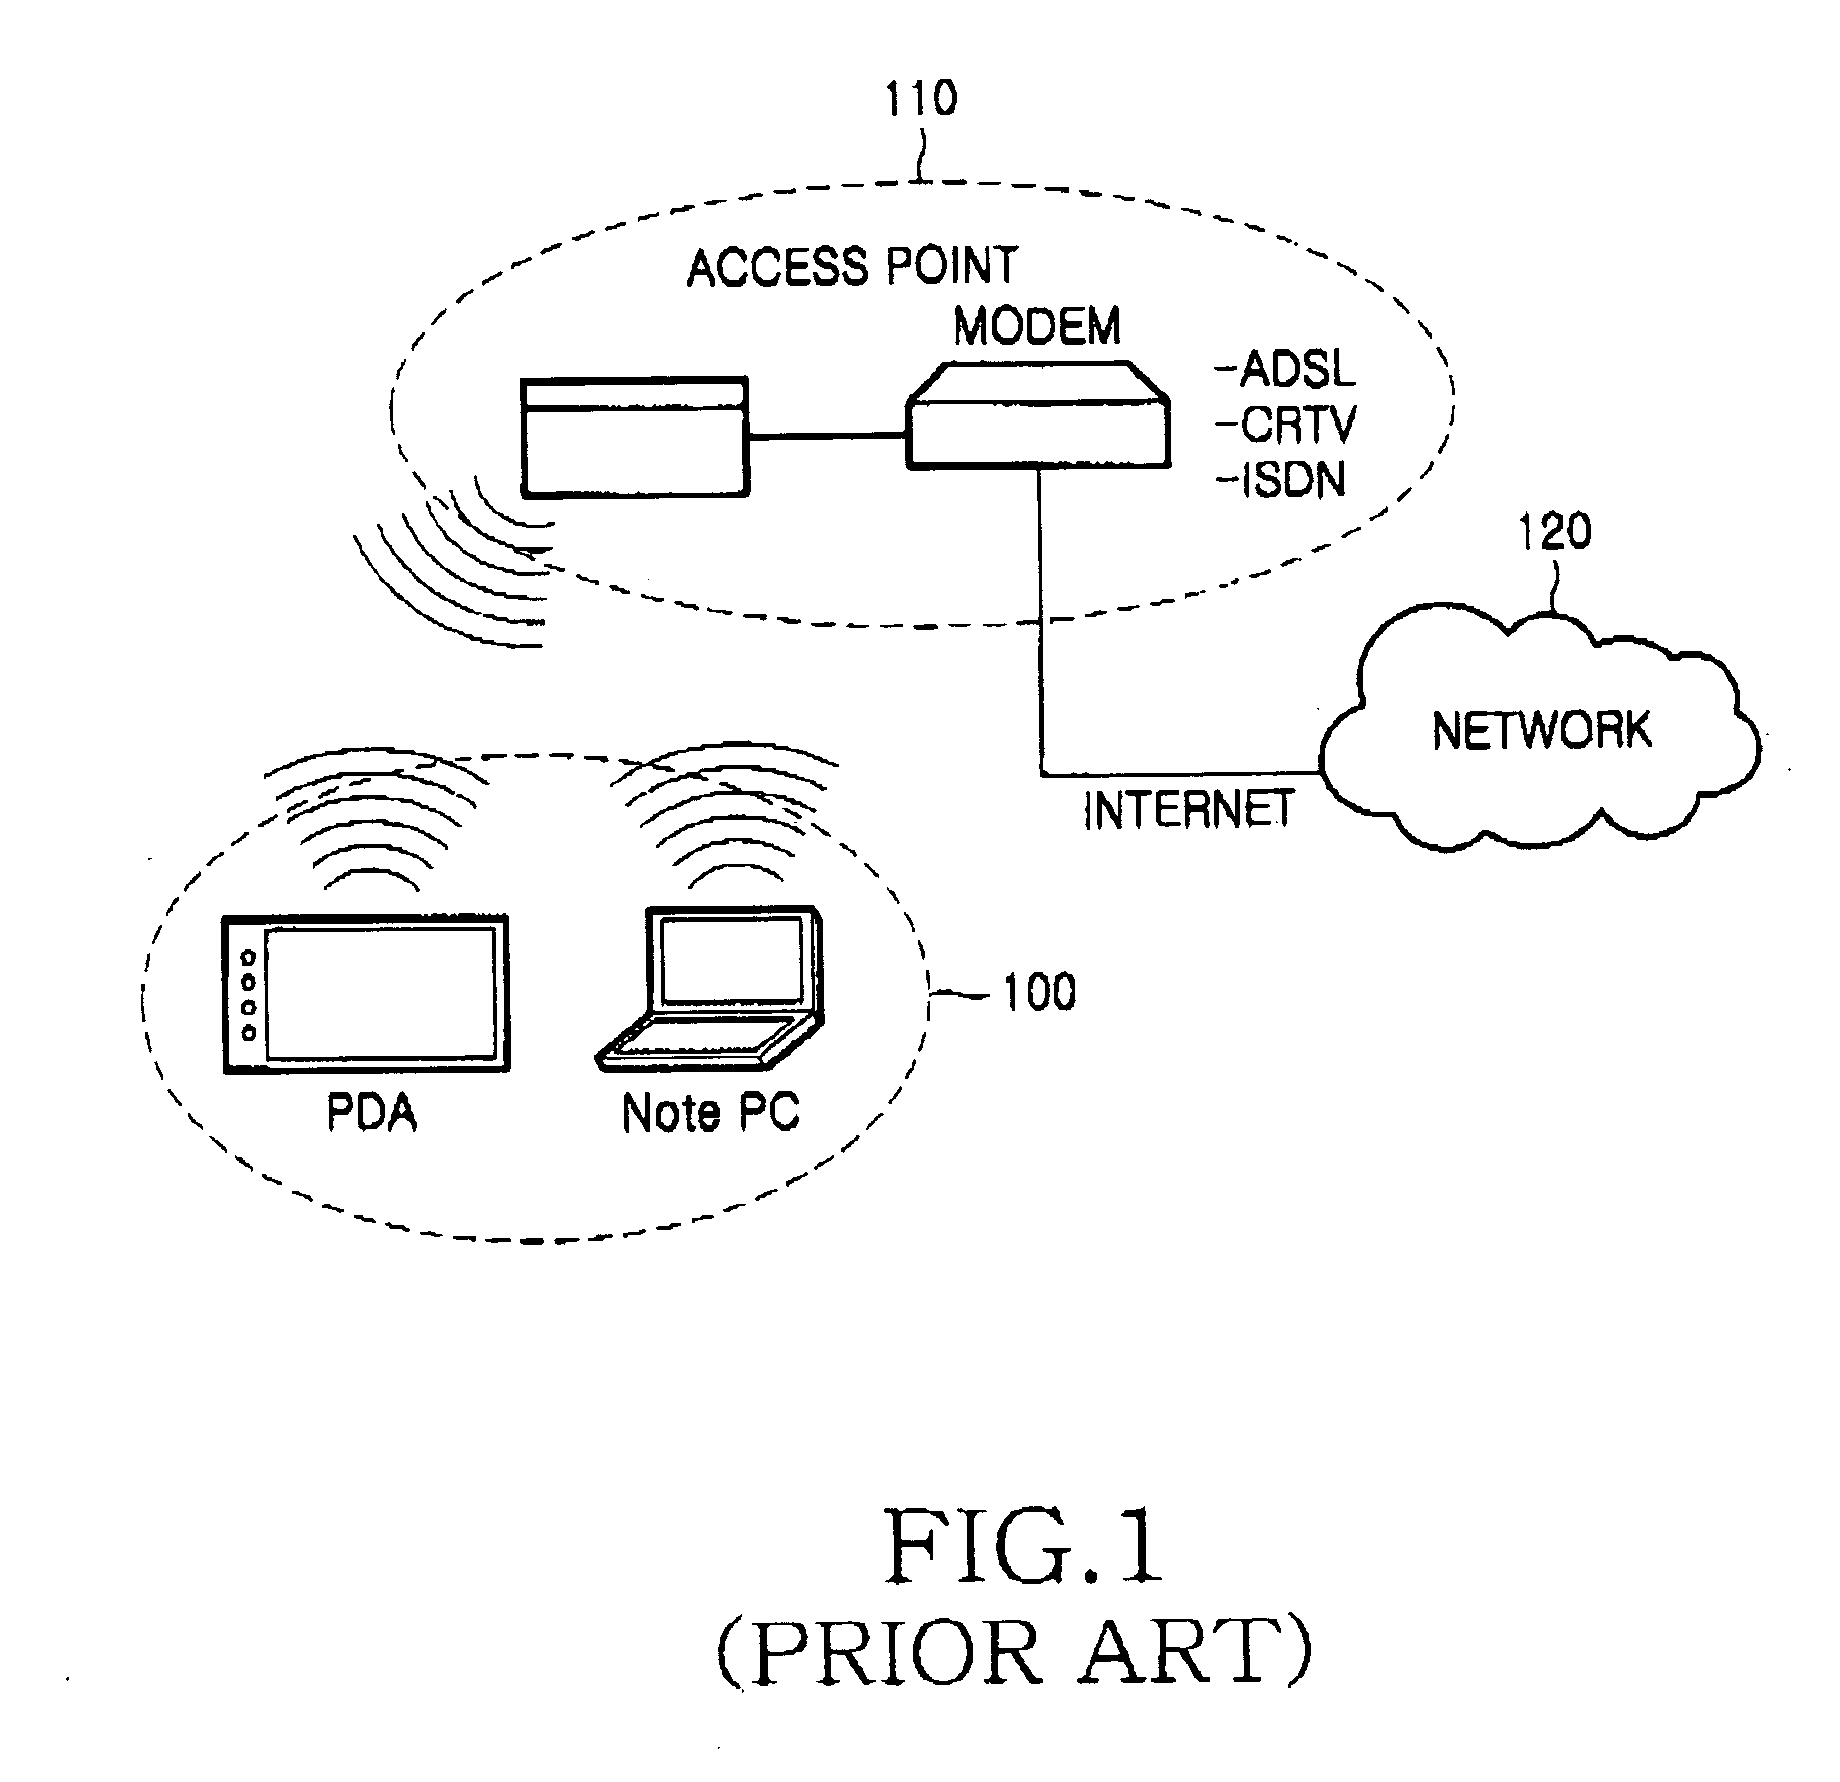 AGPS system using NTP server and method for determining the location of a terminal using a NTP server